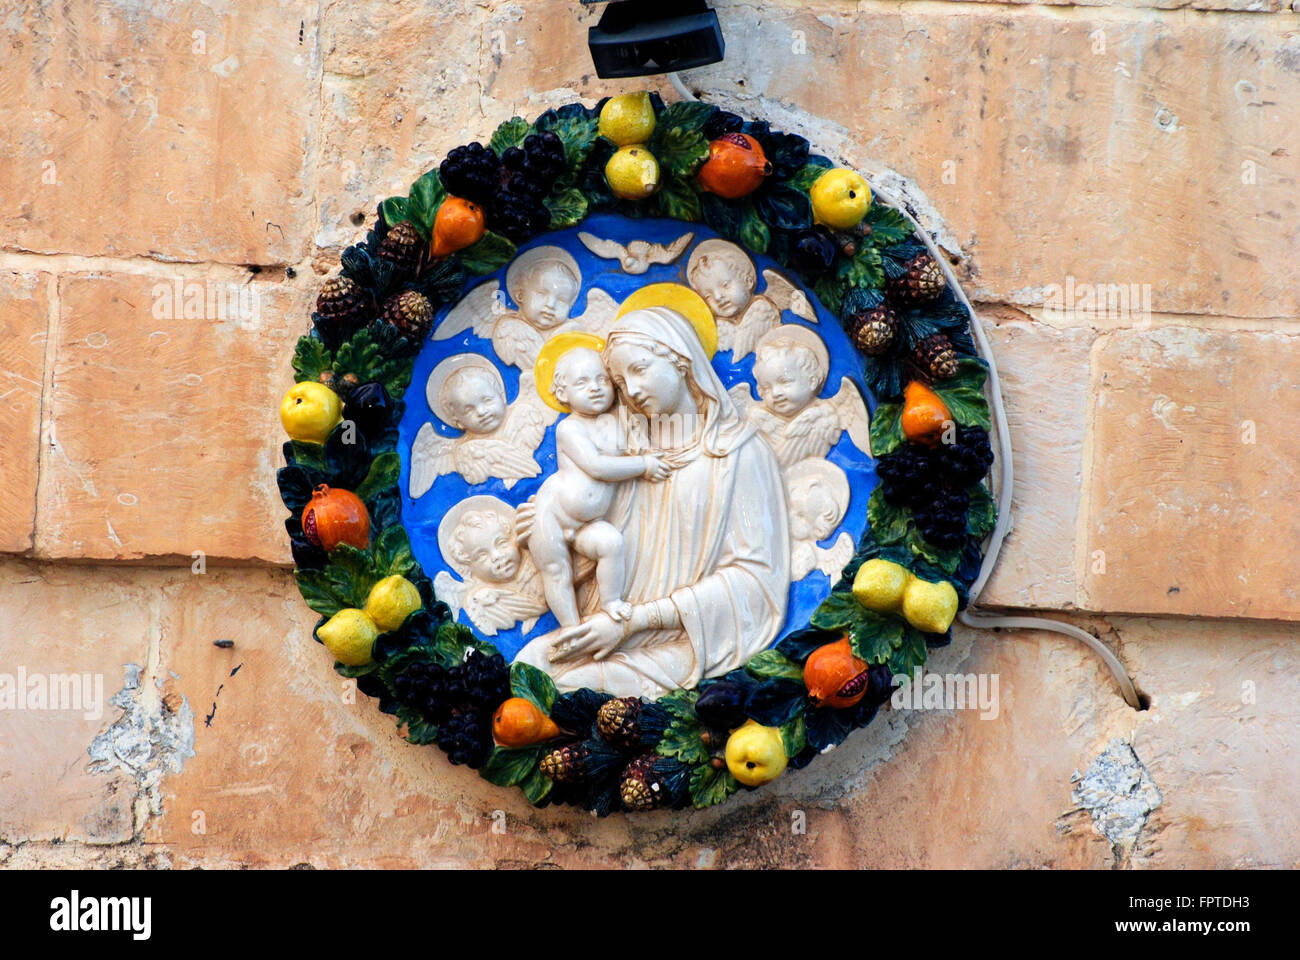 Wall sculpture in Mdina, Malta depicting Virgin Mary with child. Stock Photo